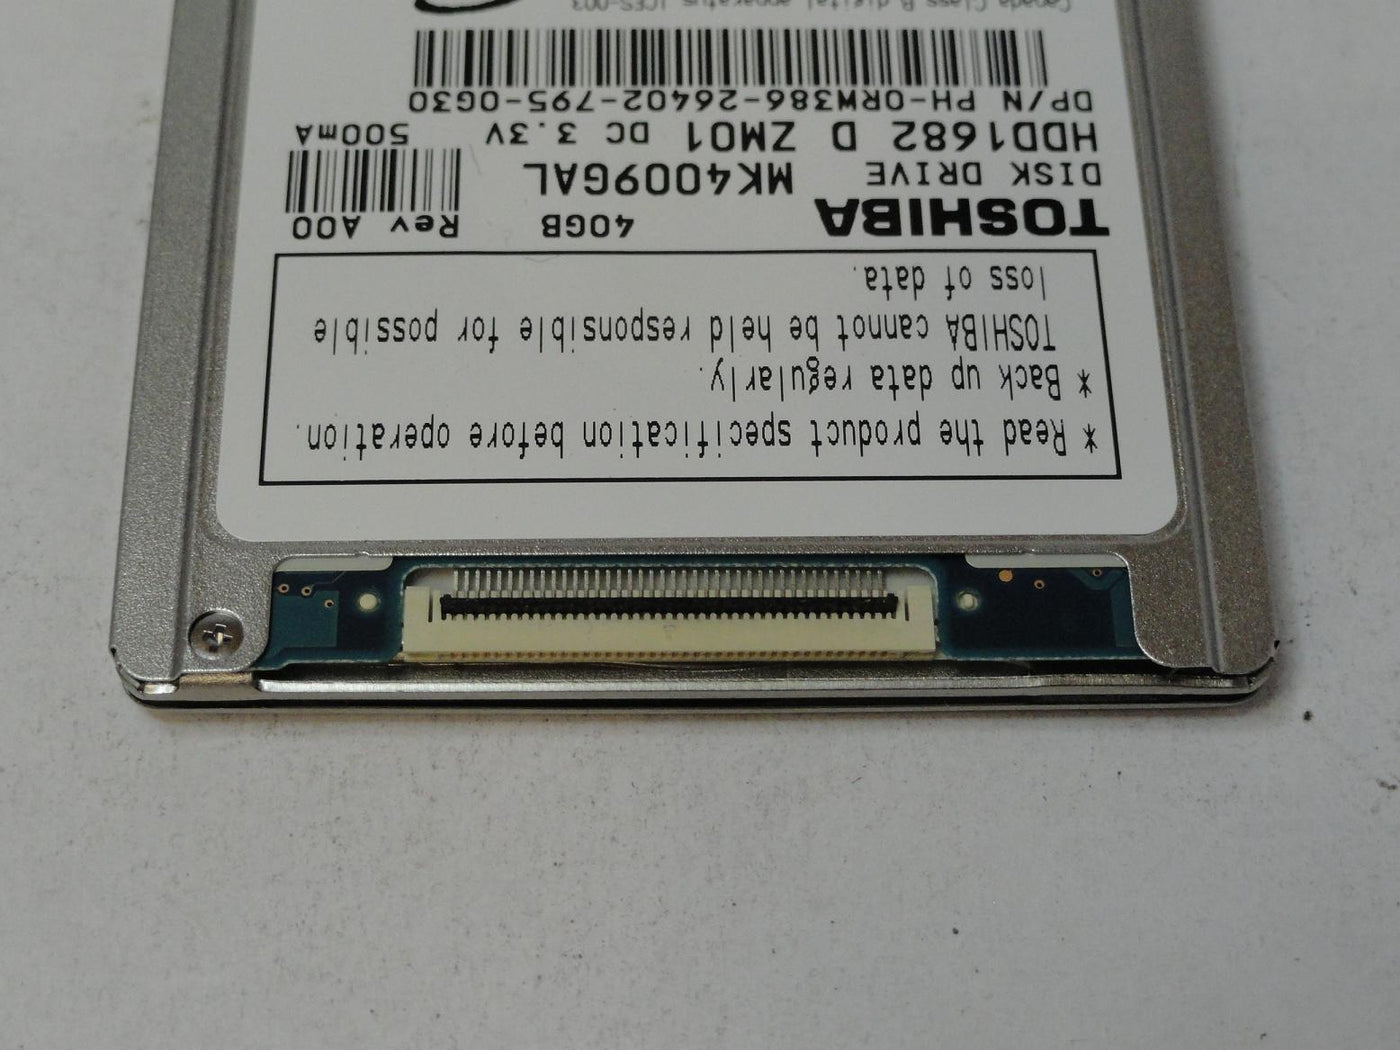 PR23894_HDD1682_Toshiba Dell 40GB ZIF 4200rpm 1.8in HDD - Image2